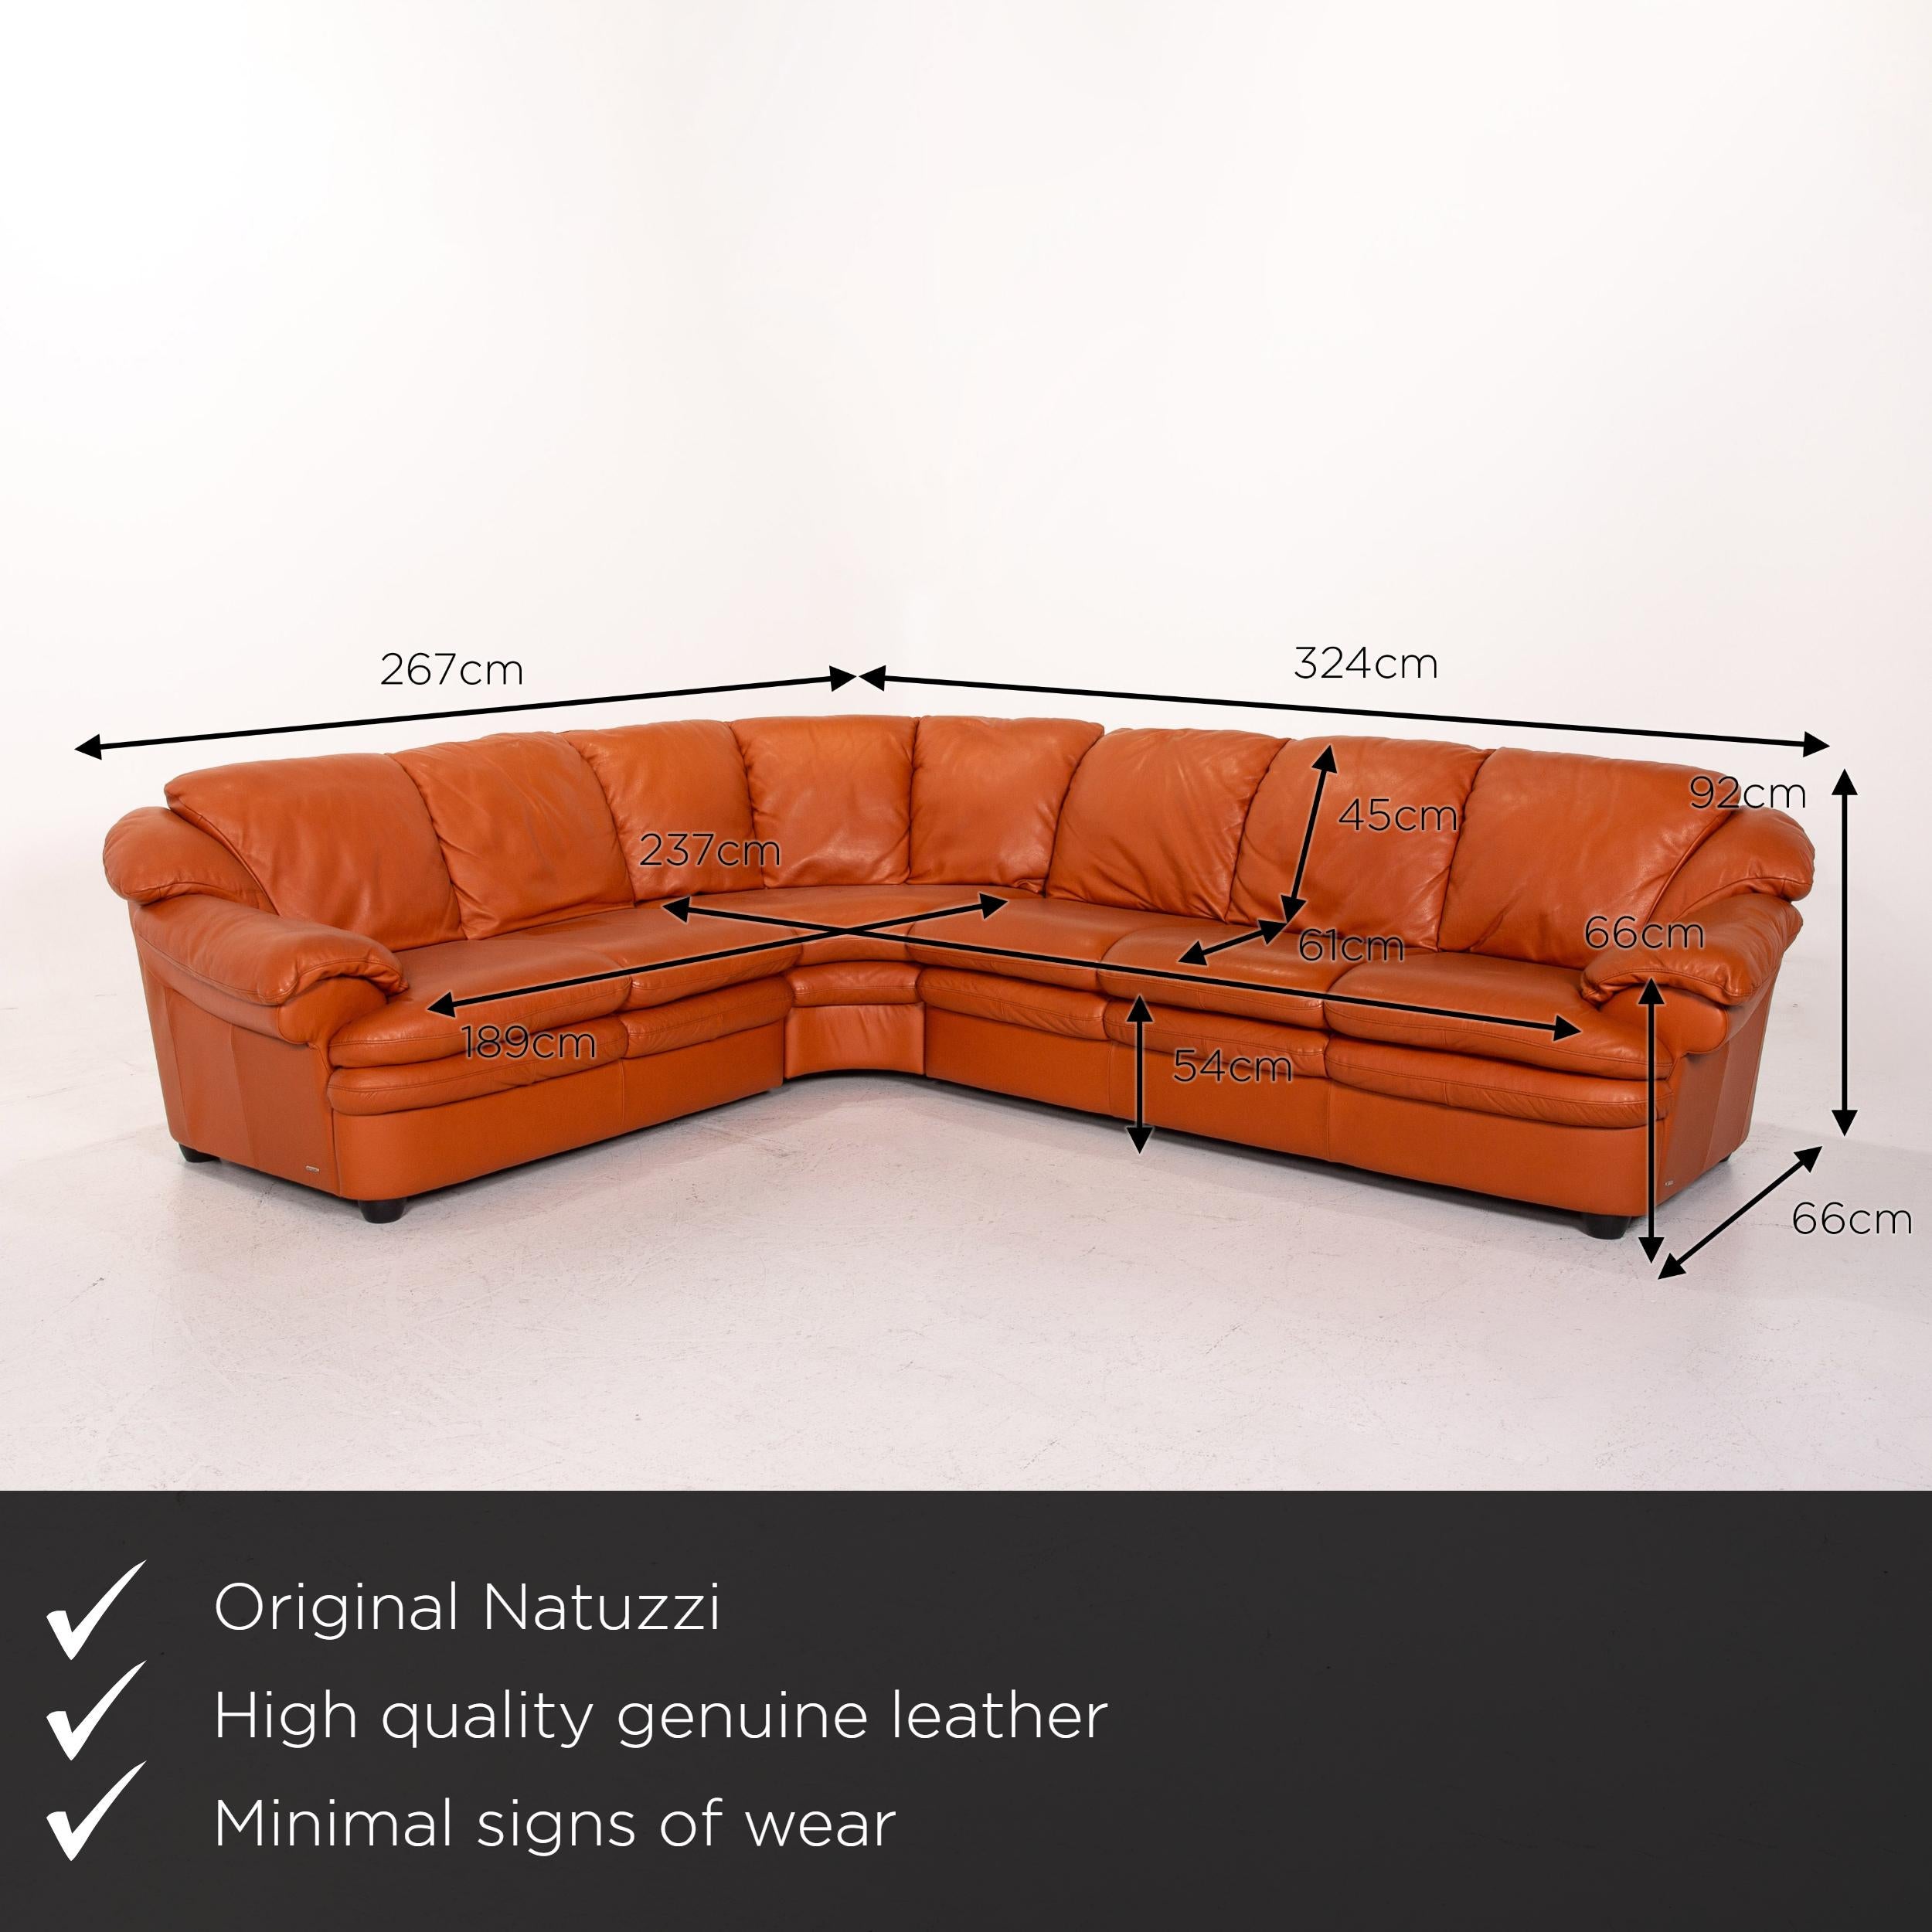 We present to you a Natuzzi leather corner sofa terracotta orange sofa couch.


 Product measurements in centimeters:
 

Depth 99
Width 267
Height 92
Seat height 54
Rest height 66
Seat depth 61
Seat width 189
Back height 45.
 